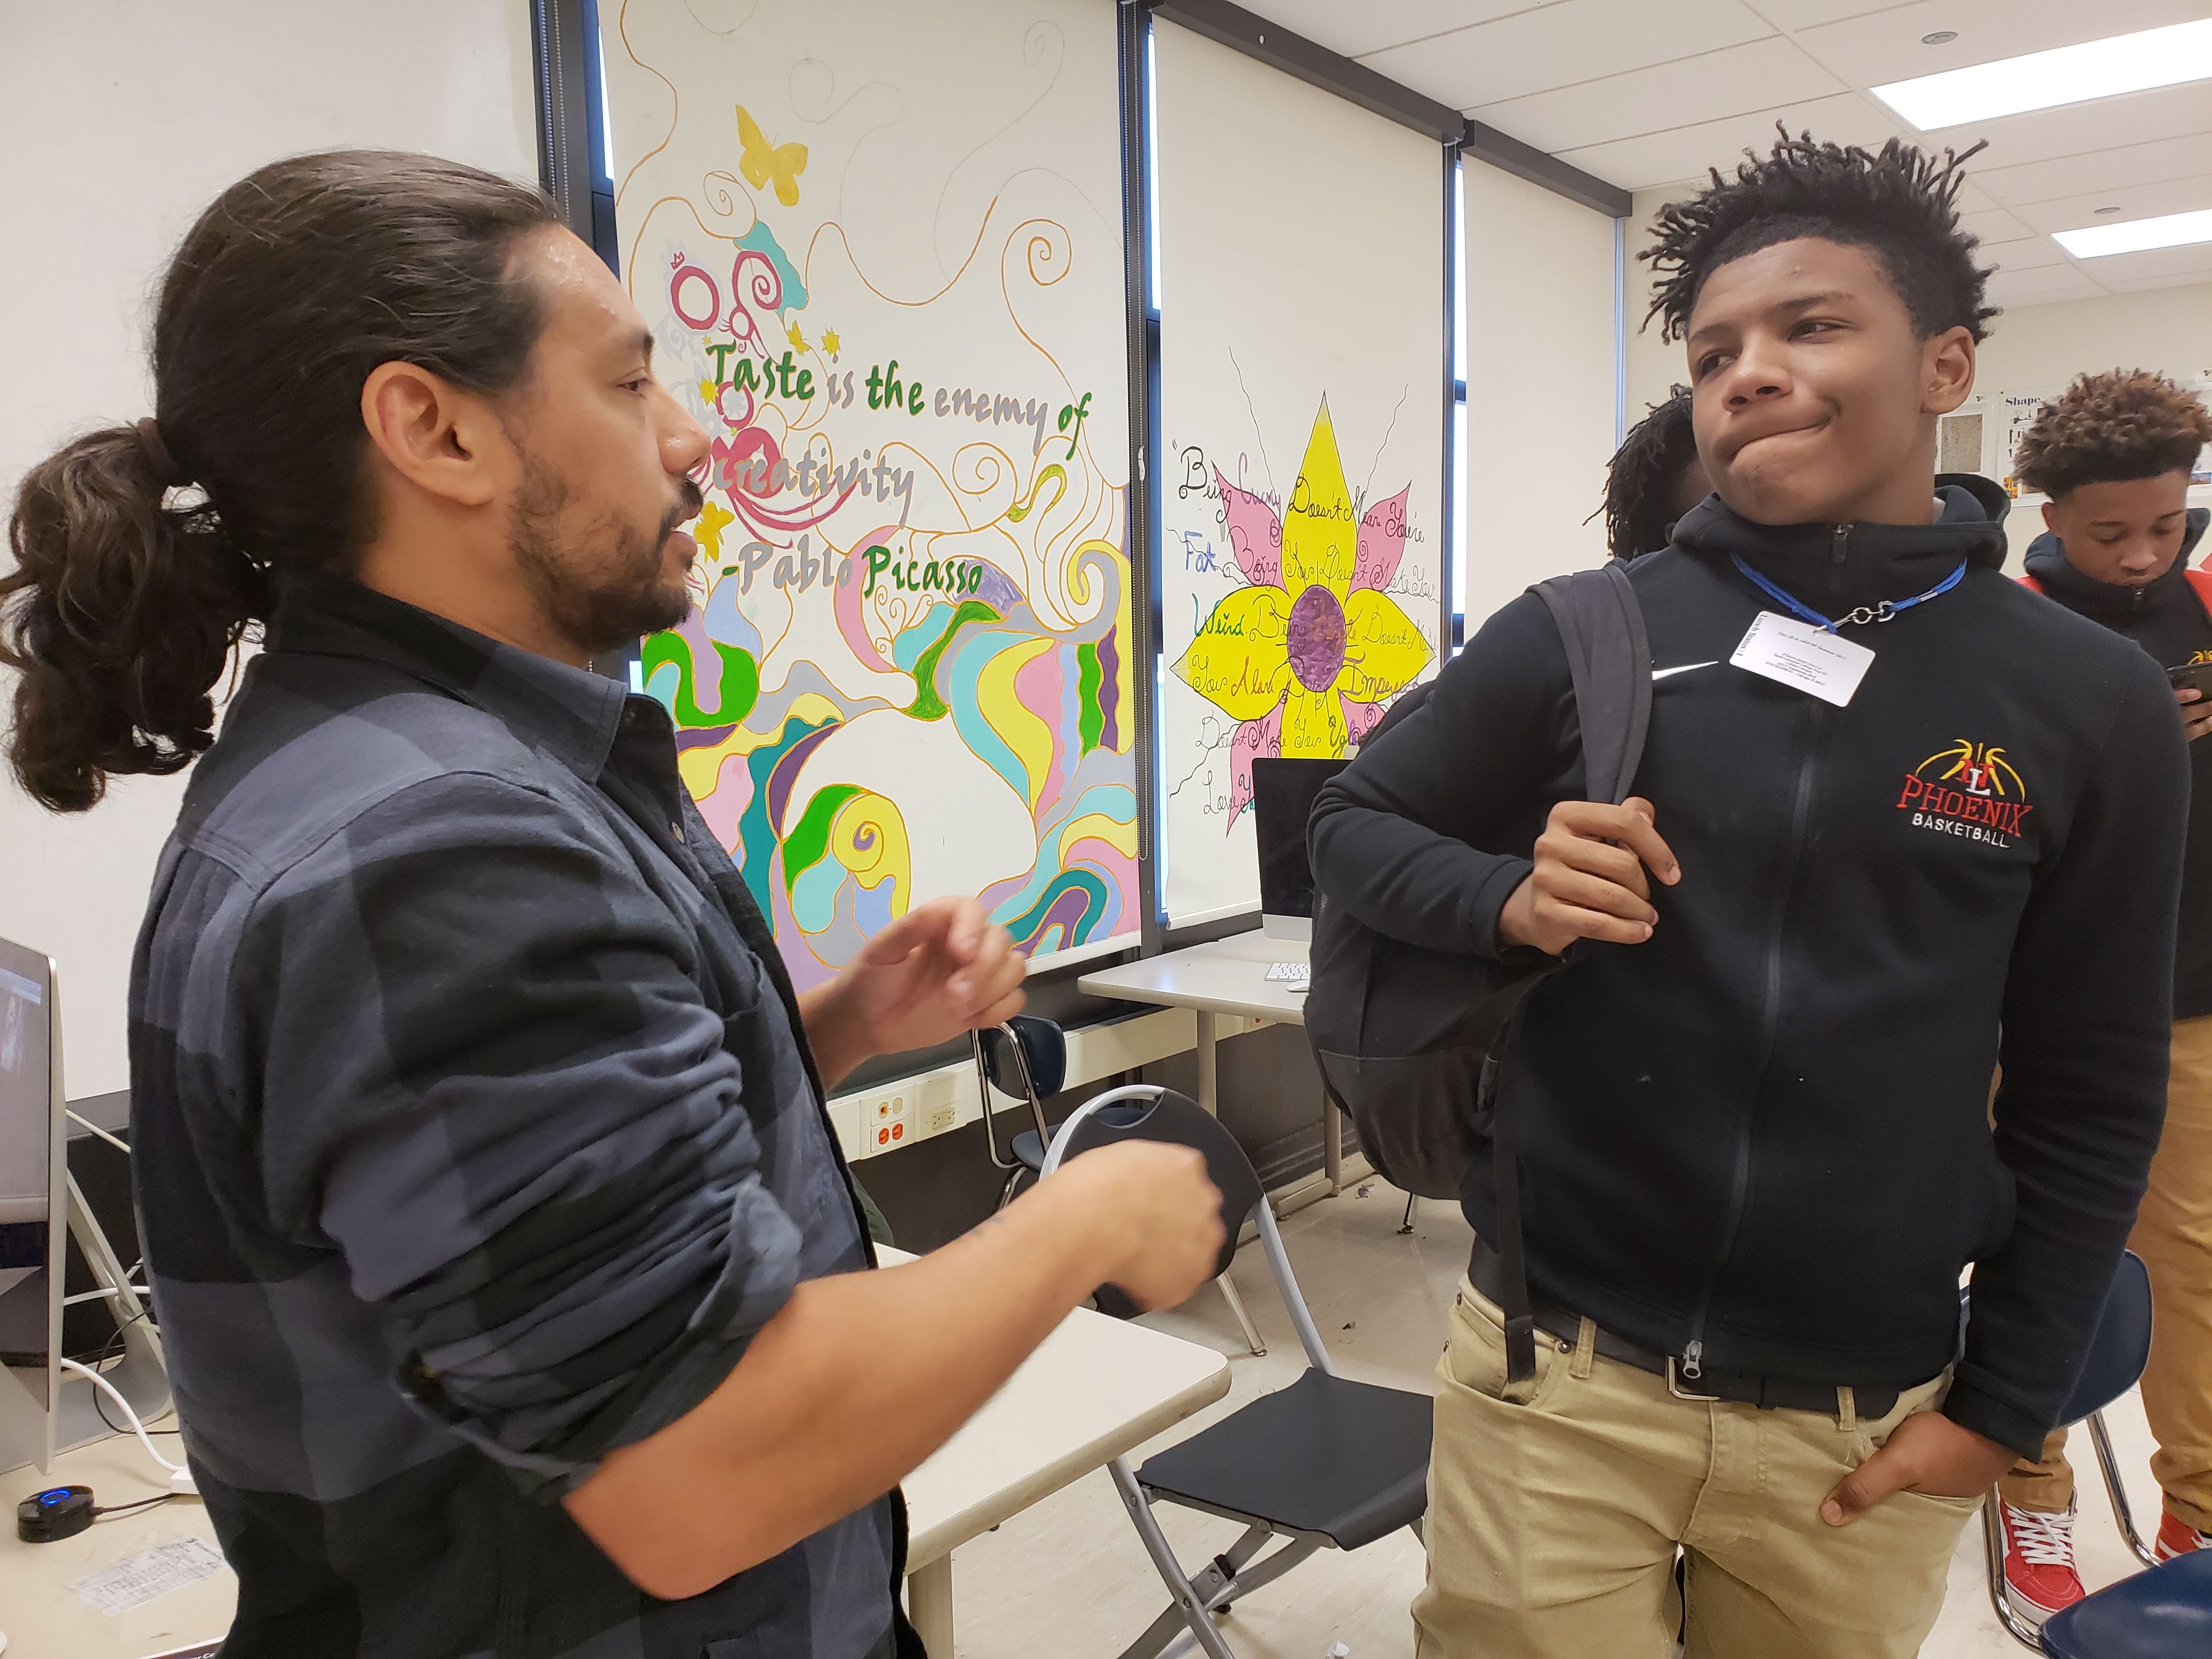 Photojournalist Brian Frank talks with students after class at North Lawndale College Prep. Image by Keta Glenn. United States, 2018.